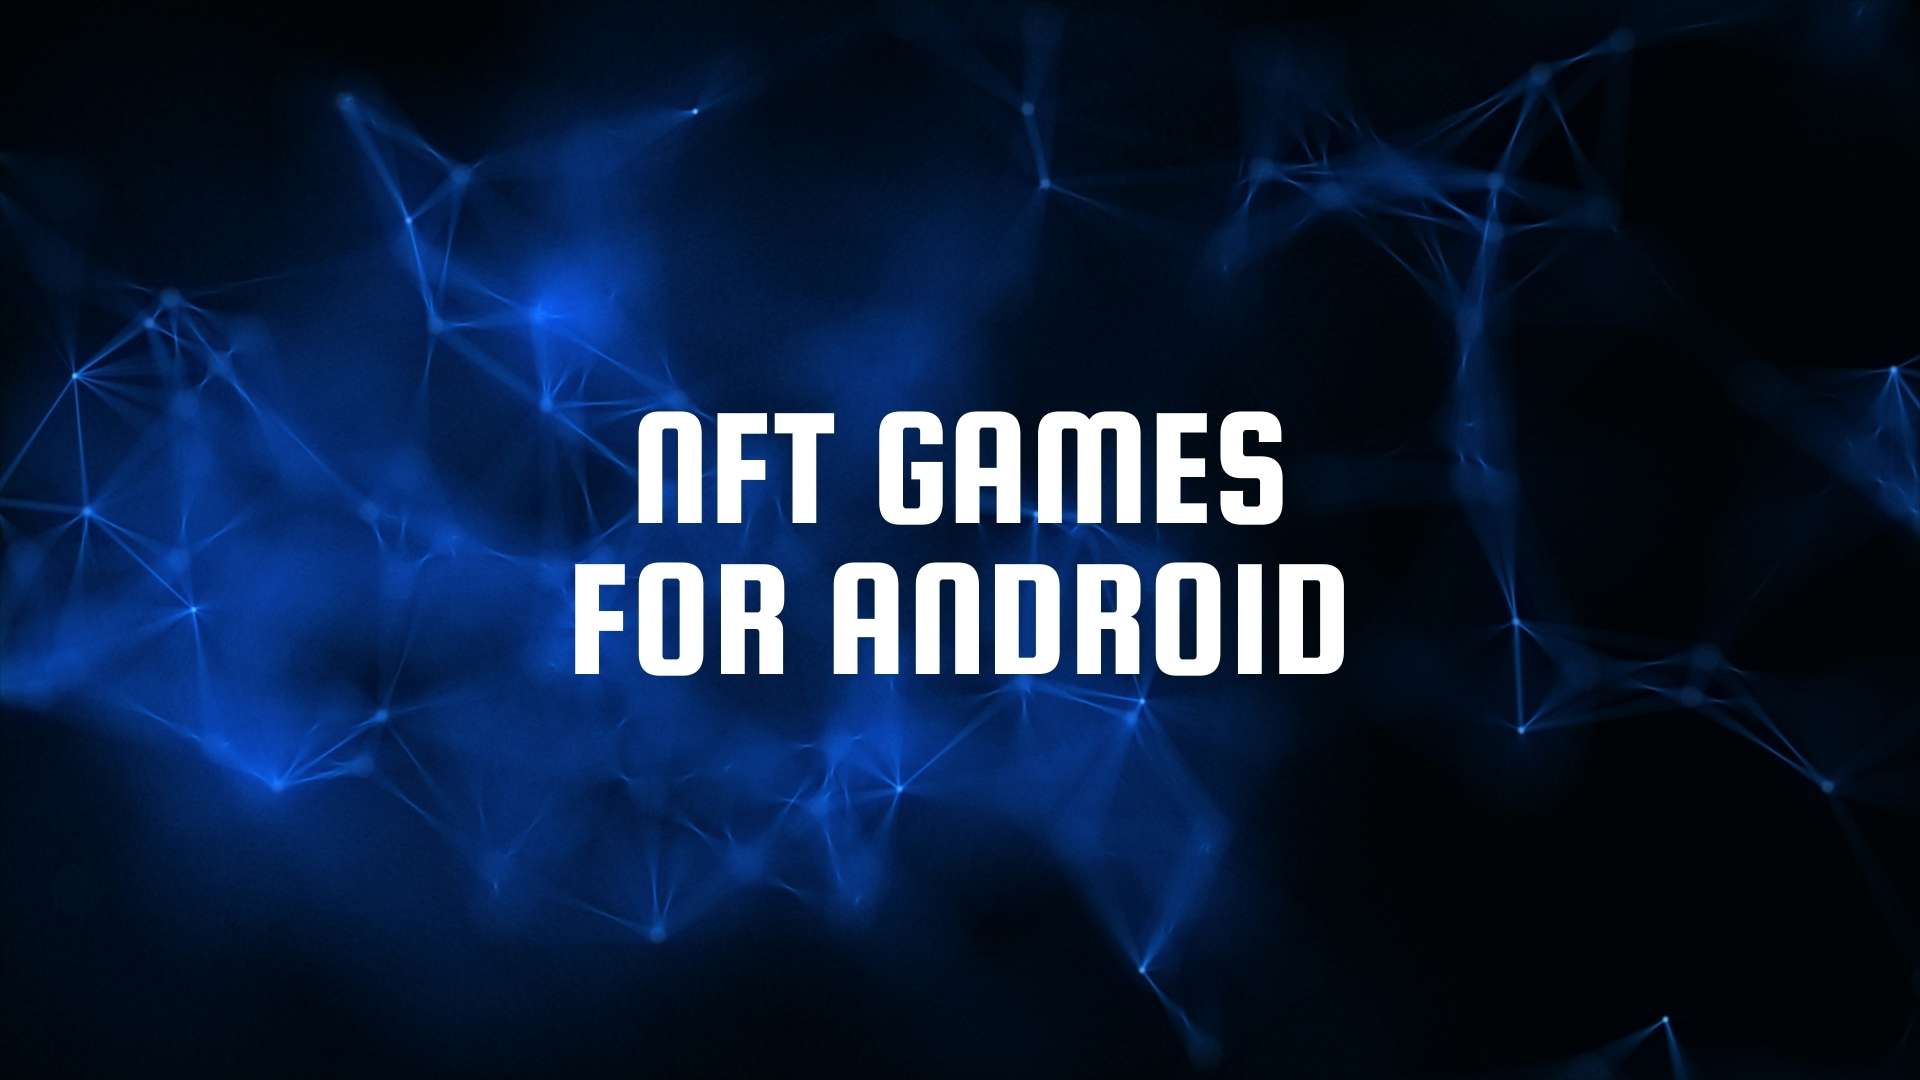 NFT games for android OS